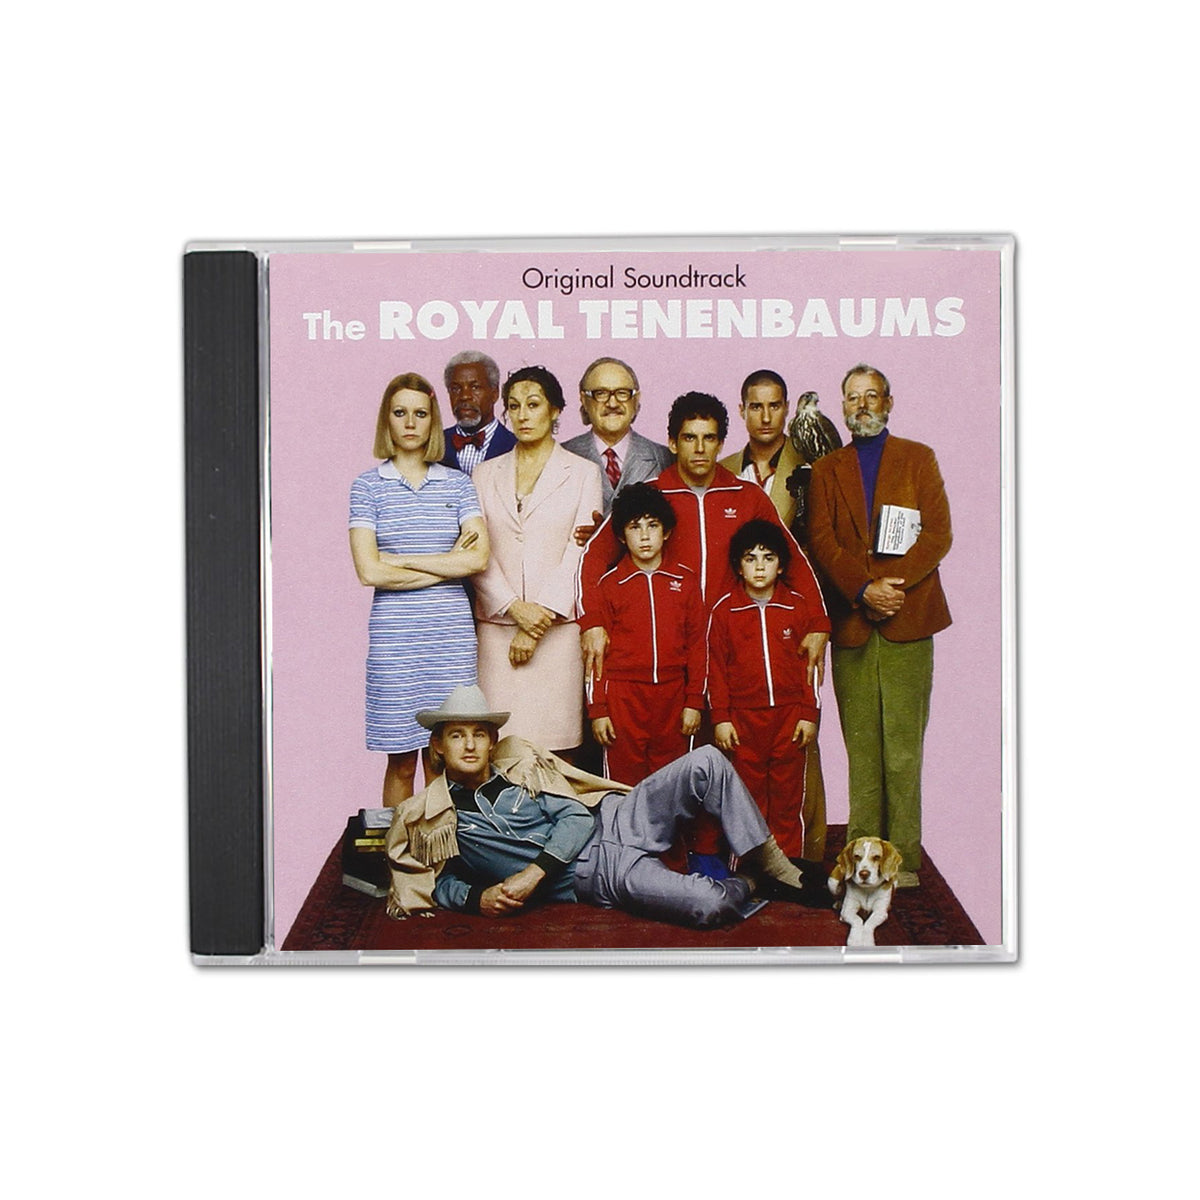 The Royal Tenenbaums Original Soundtrack Cd The Society Of The Crossed Keys 